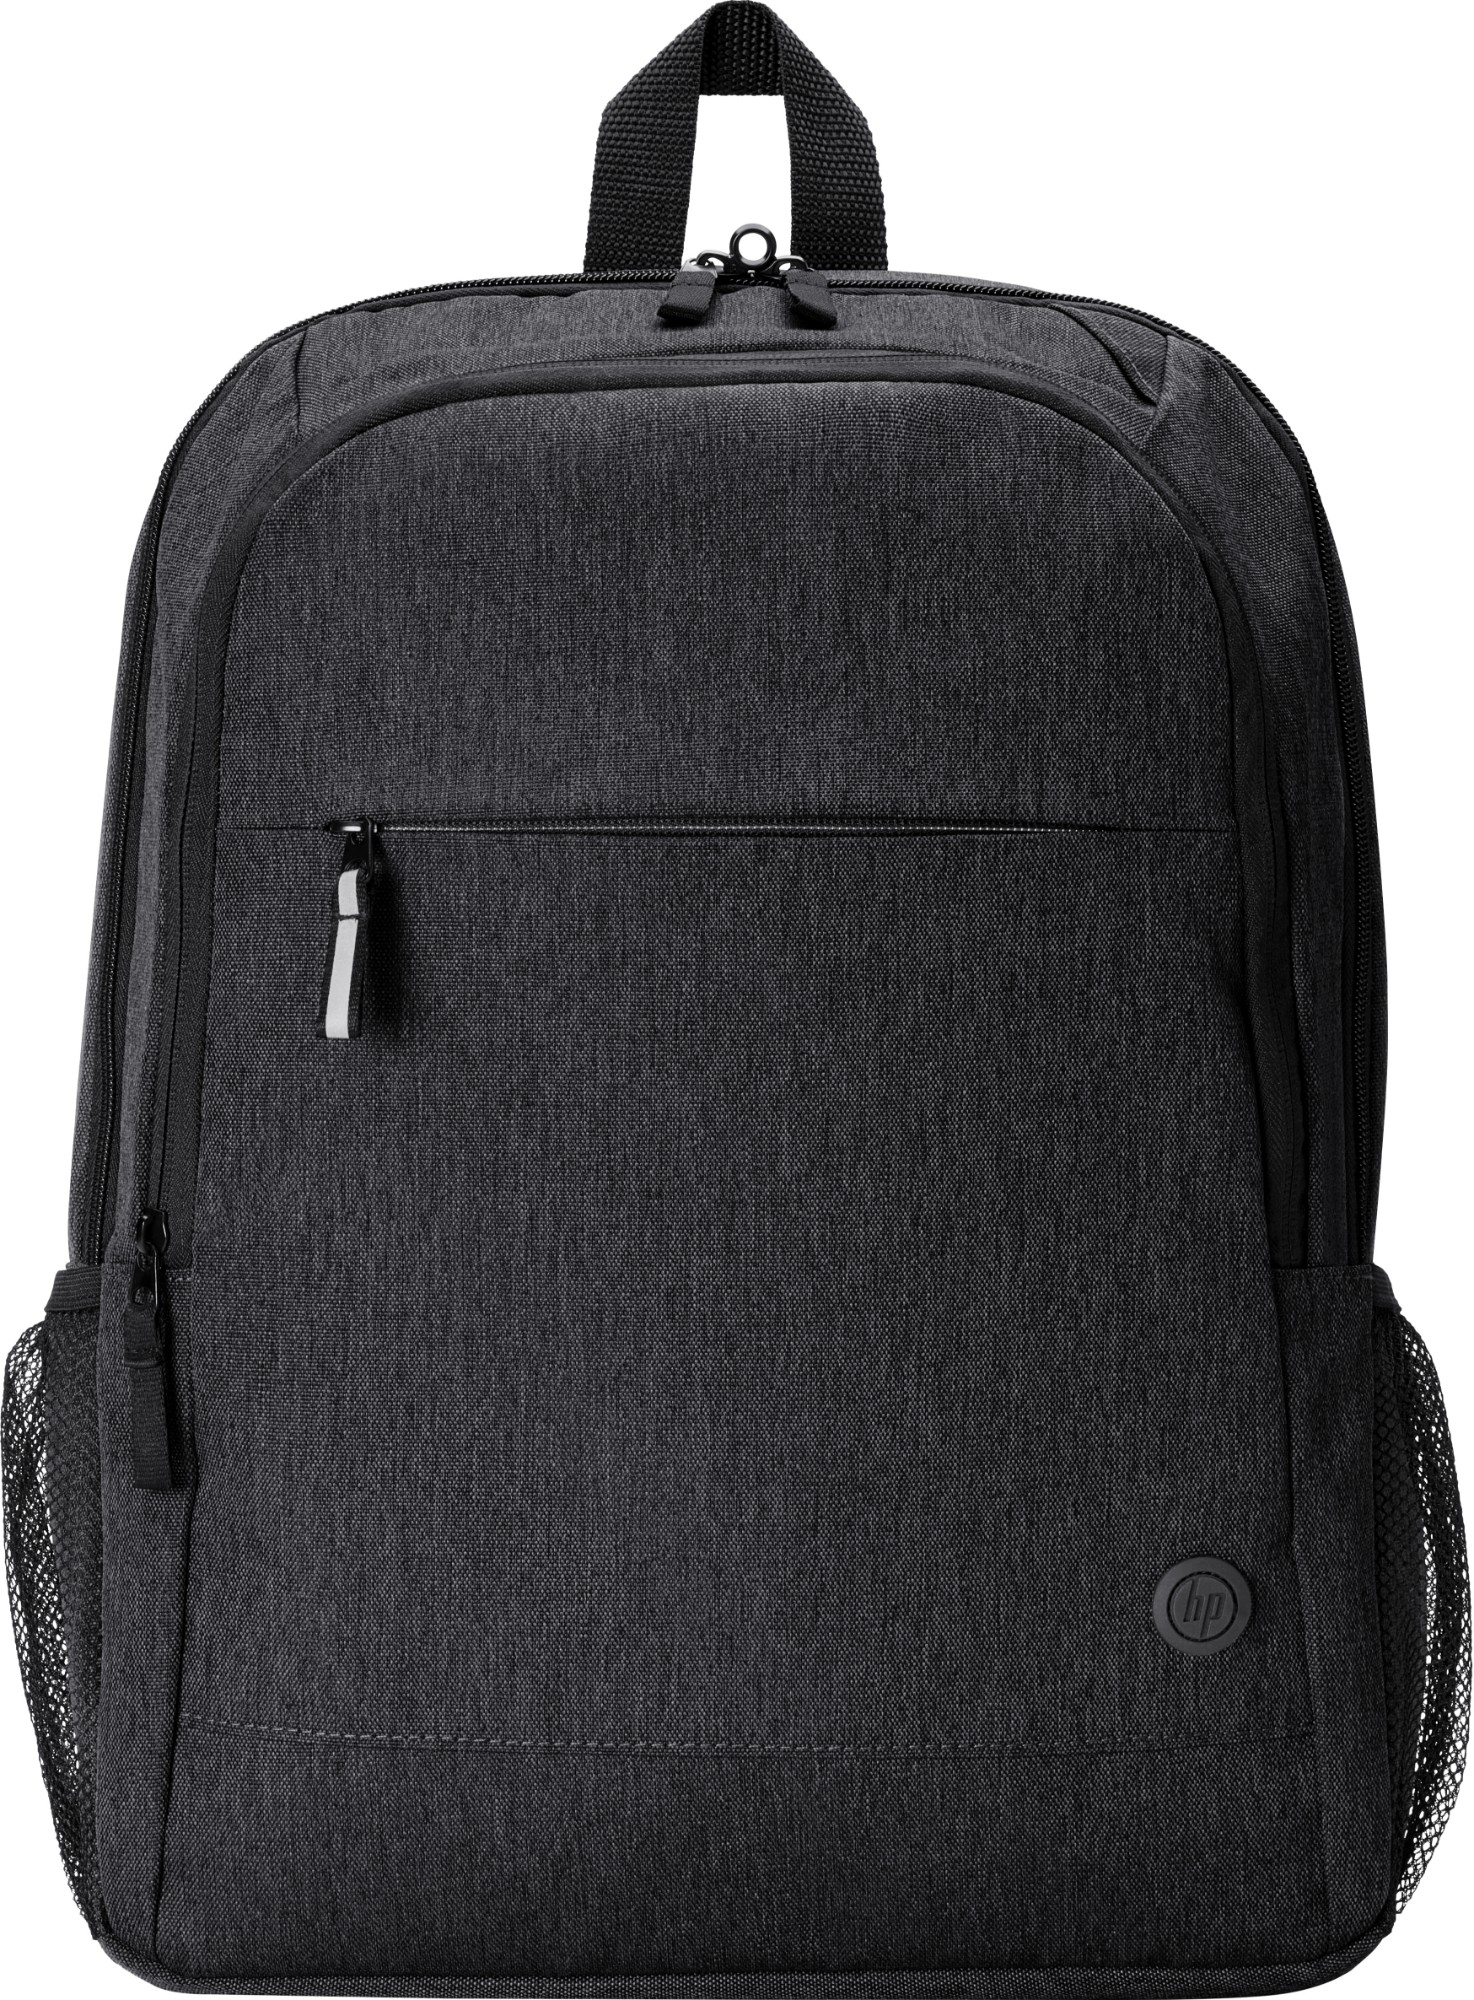 HP Prelude Pro 15.6-inch Recycled Backpack - 1X644AA